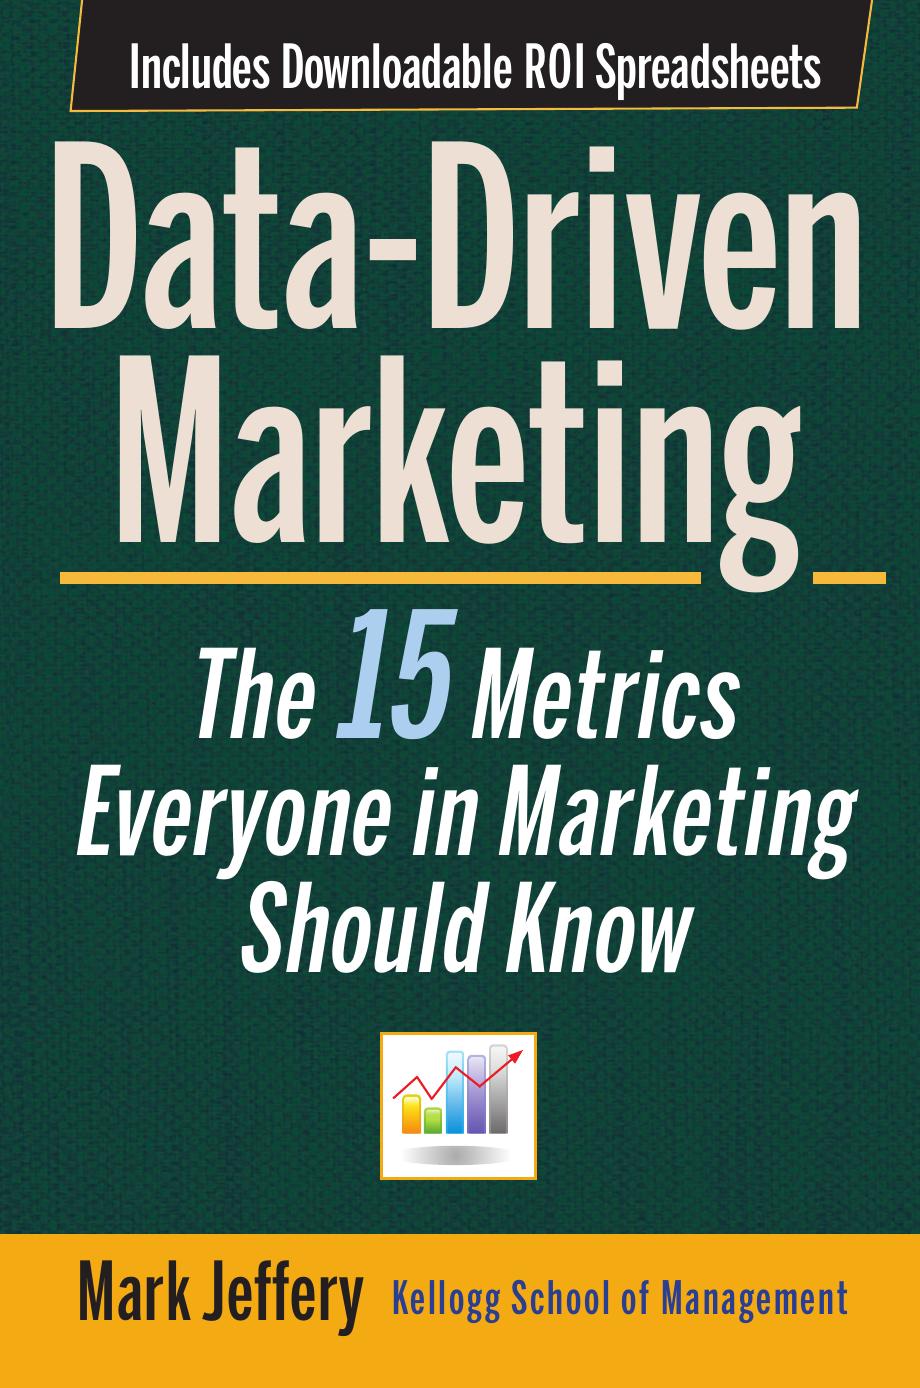 Data-Driven Marketing: The 15 Metrics Everyone in Marketing Should Know